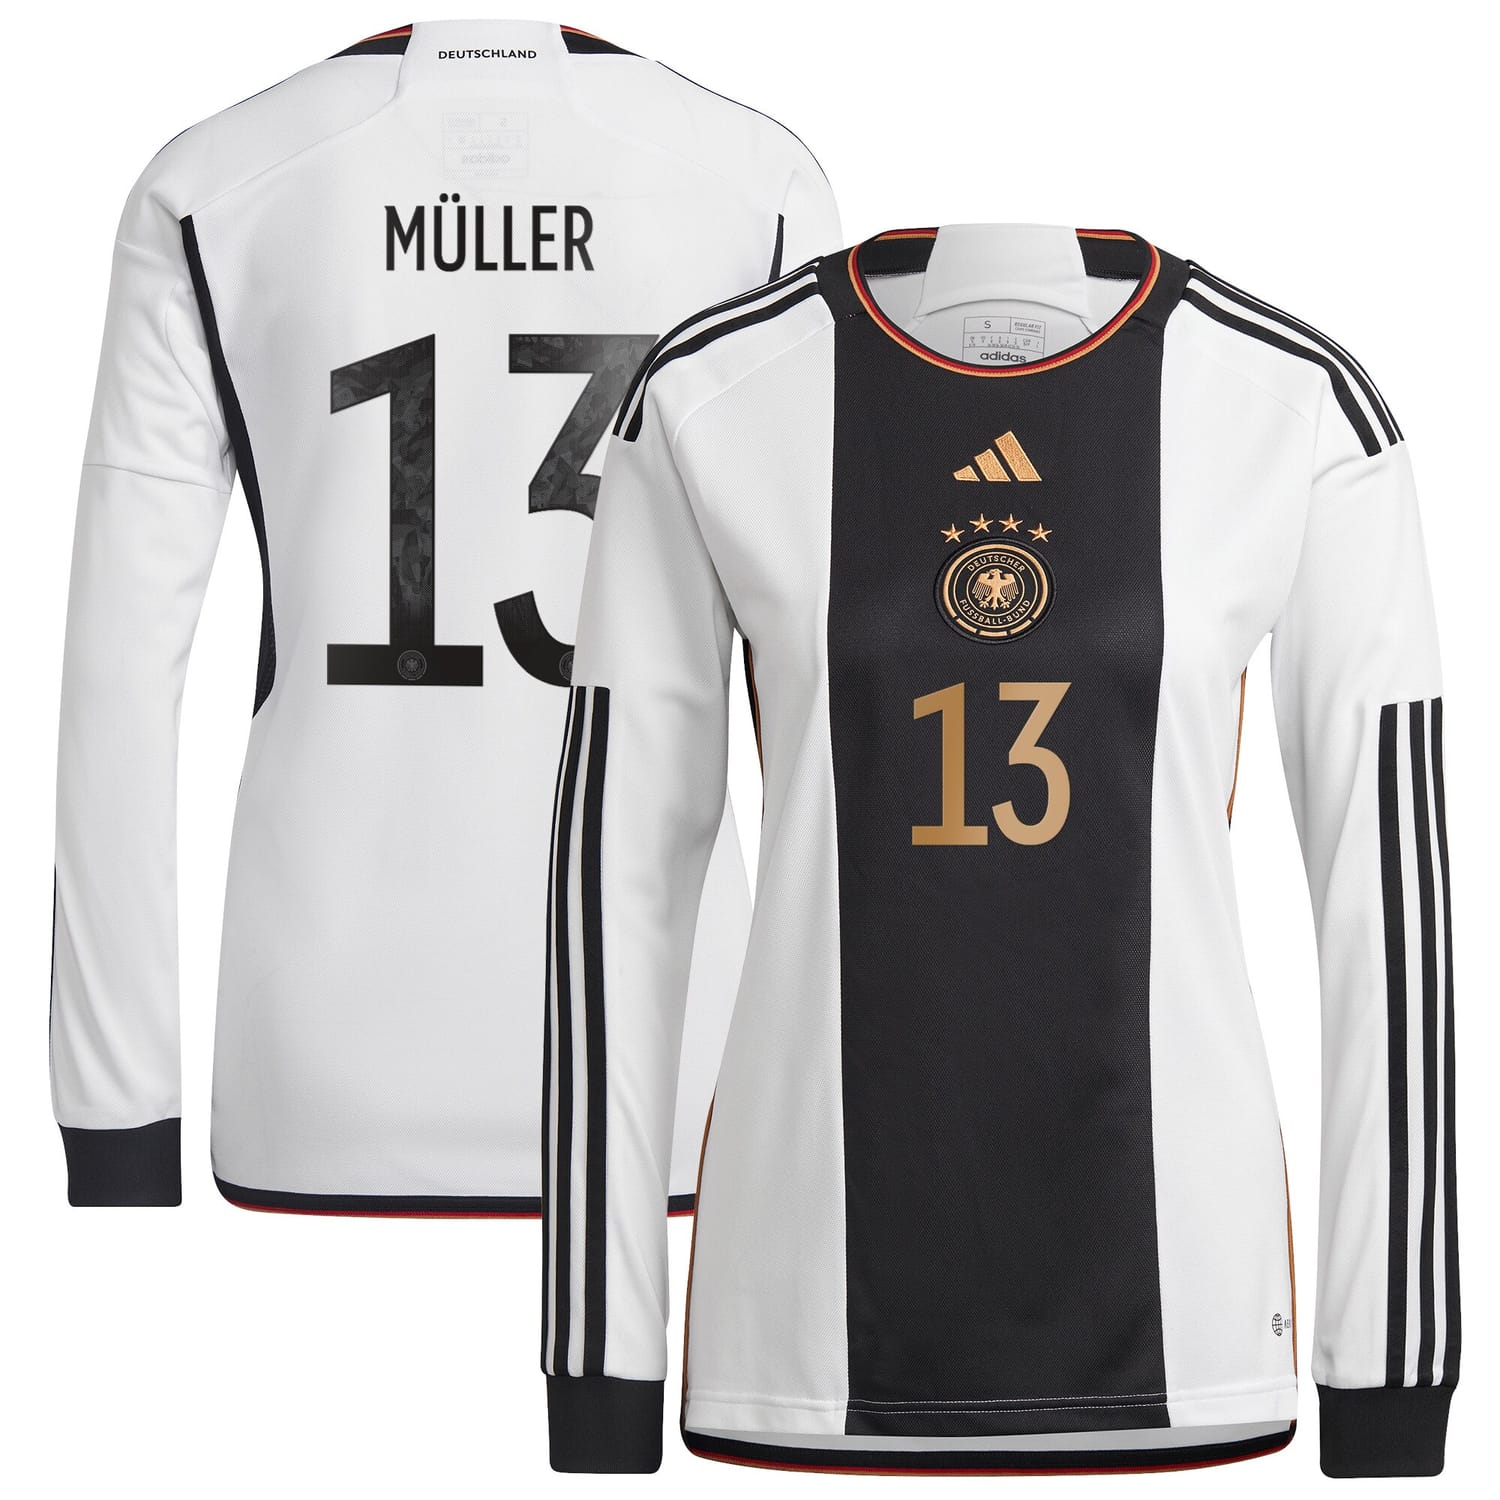 Germany National Team Home Jersey Shirt Long Sleeve player Thomas Müller 13 printing for Women